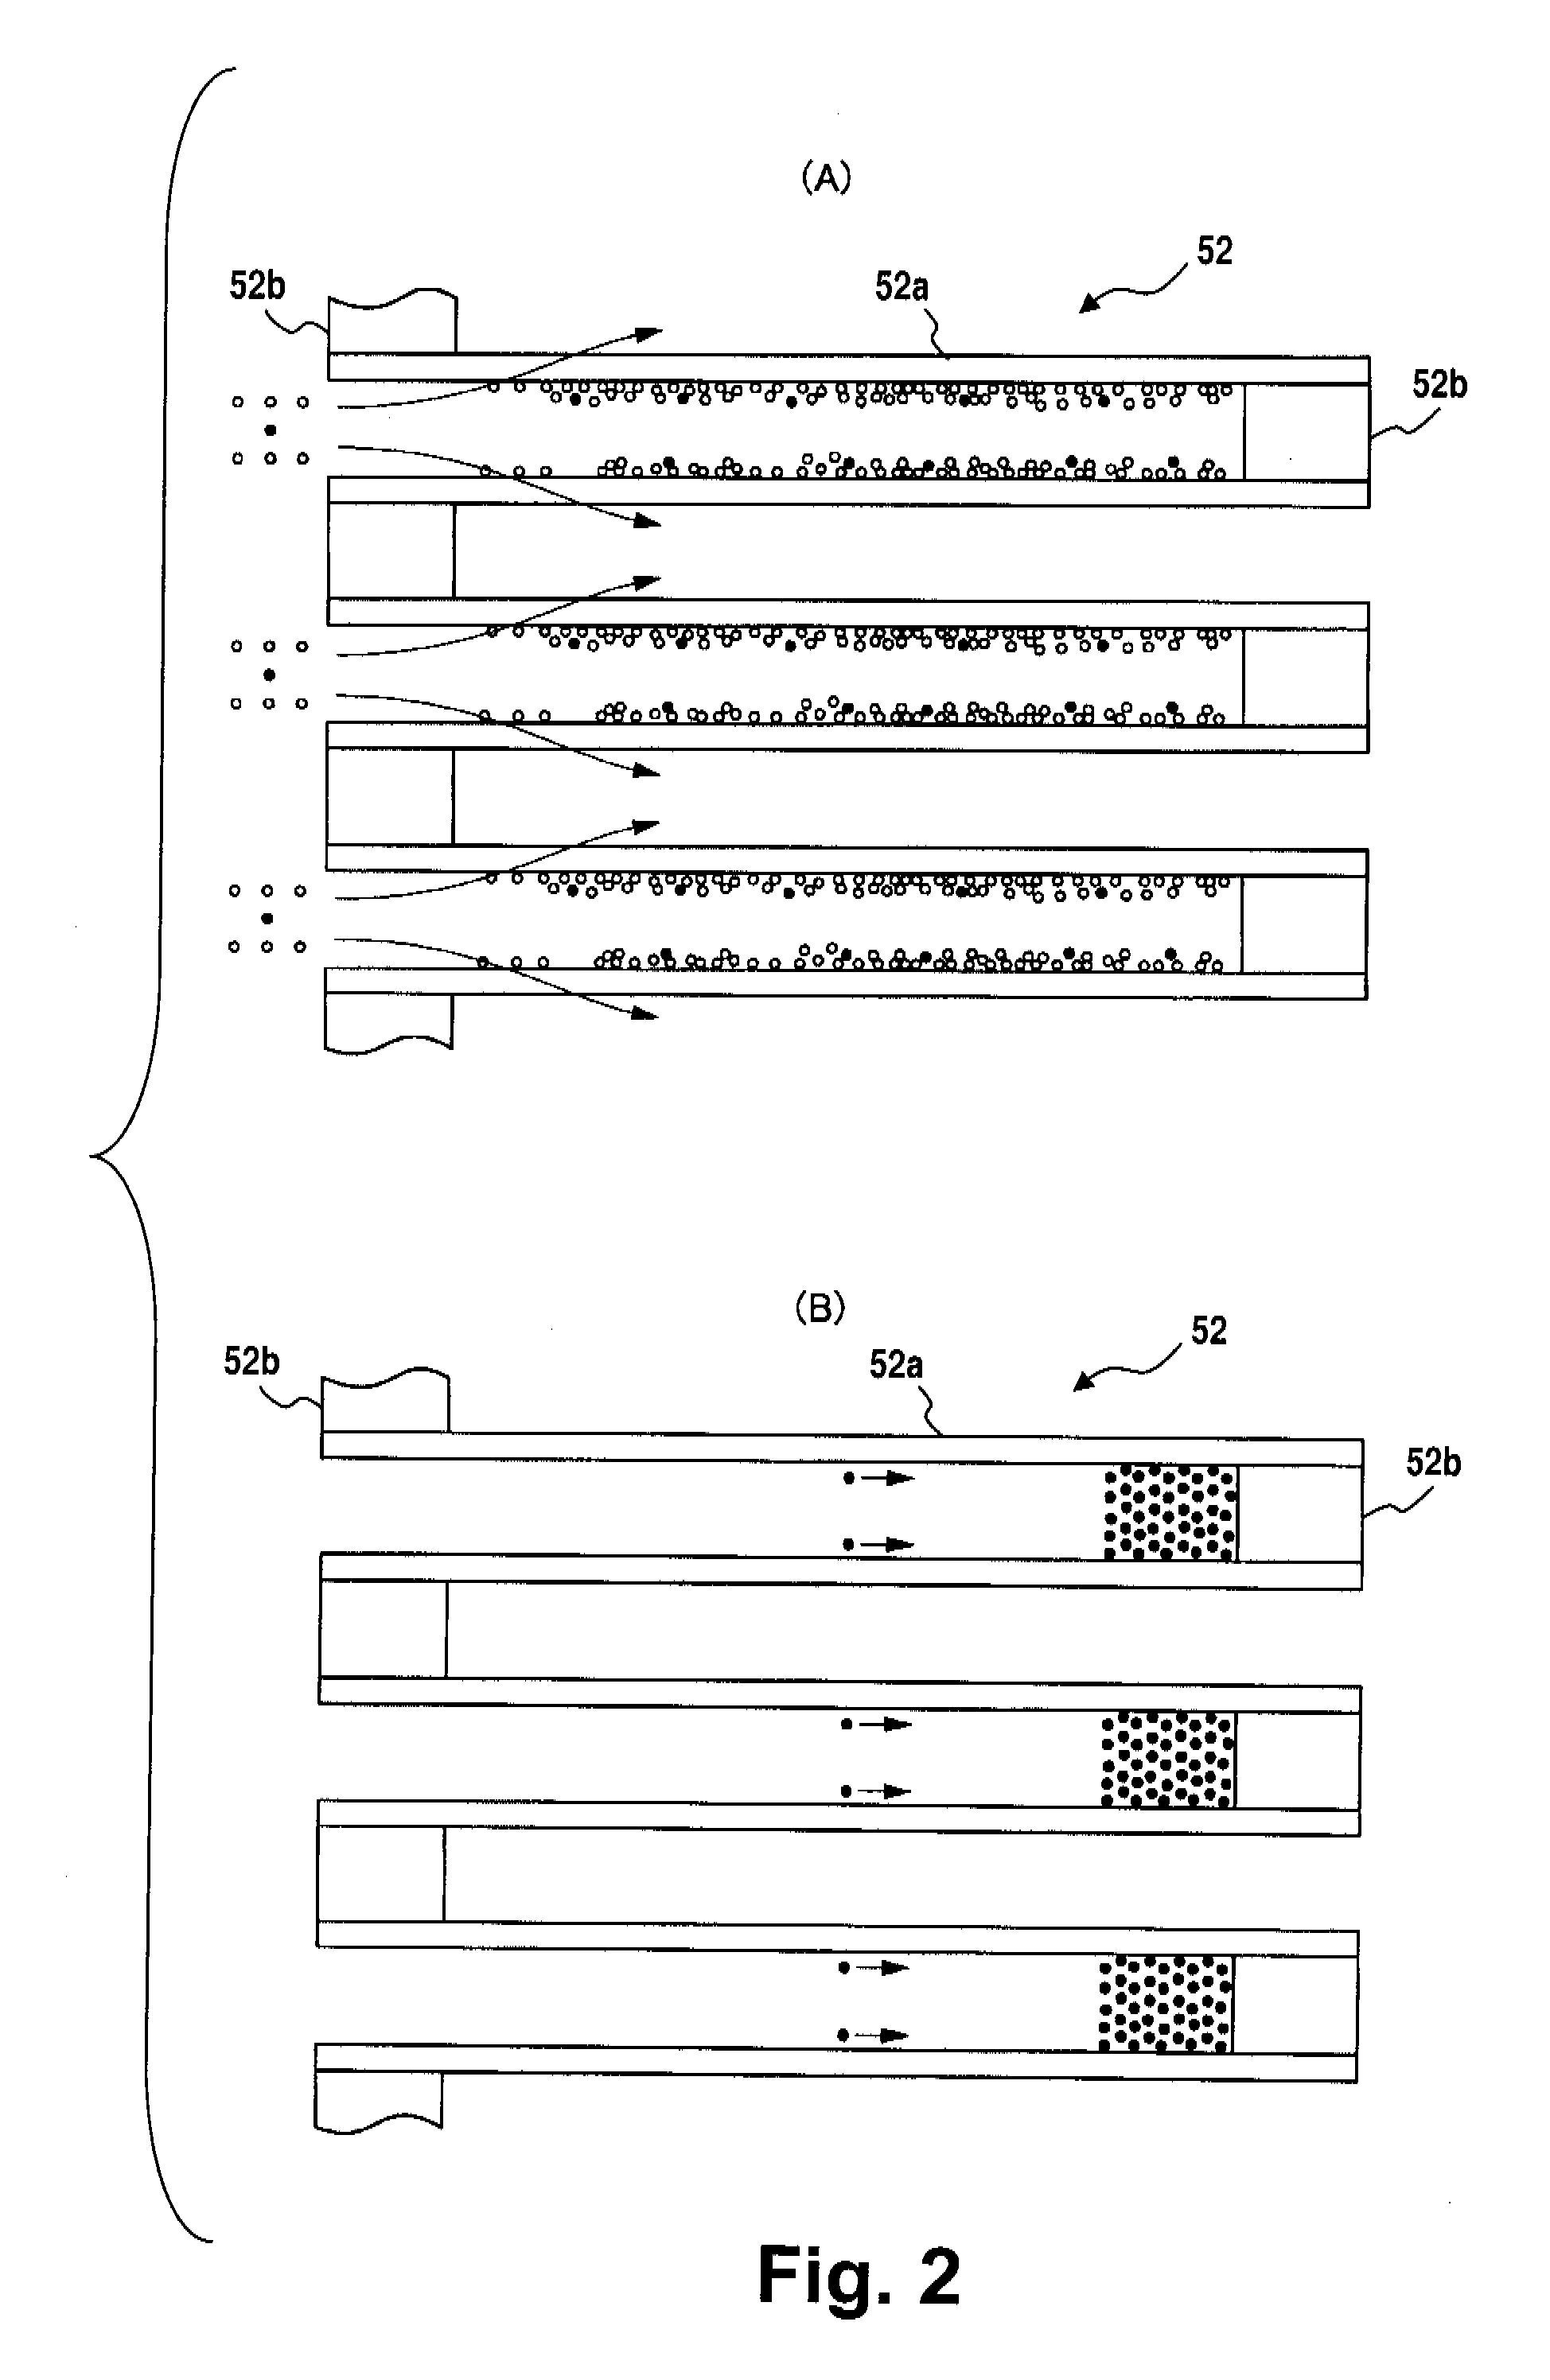 Particulate matter accumulation amount detection apparatus and method